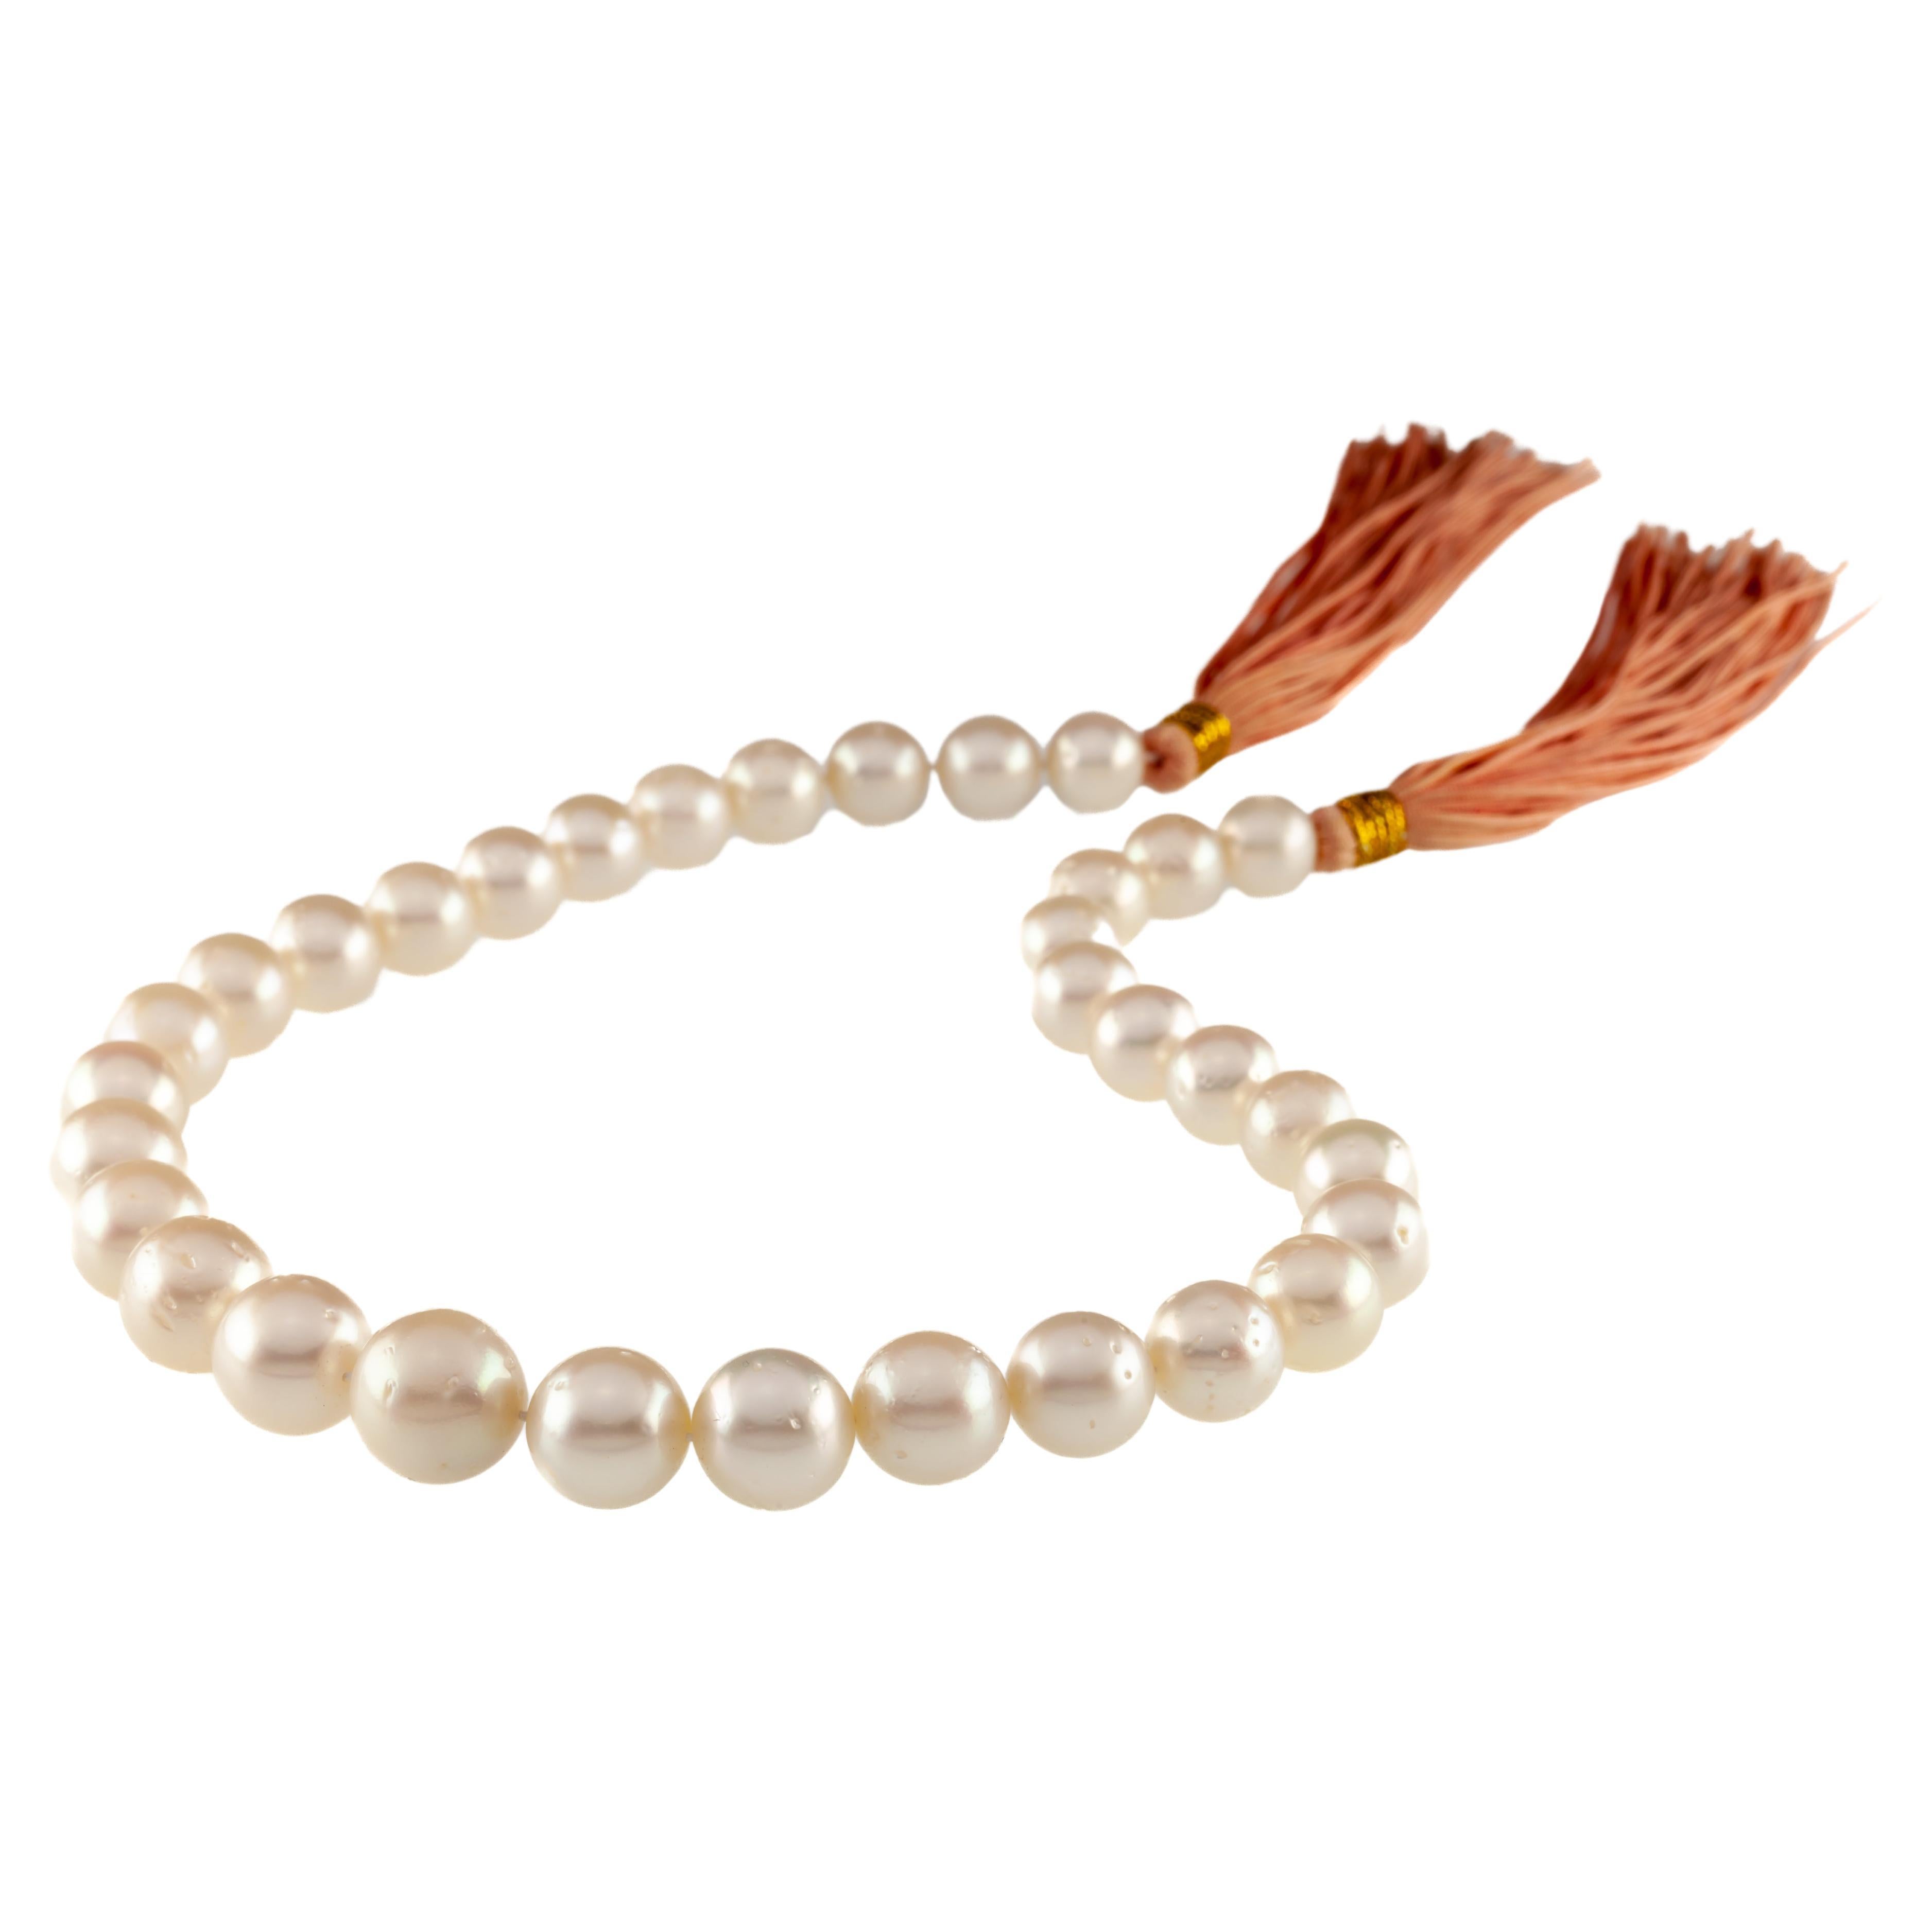 South Sea Pearl Graduated Strand with Appraisal Certificate